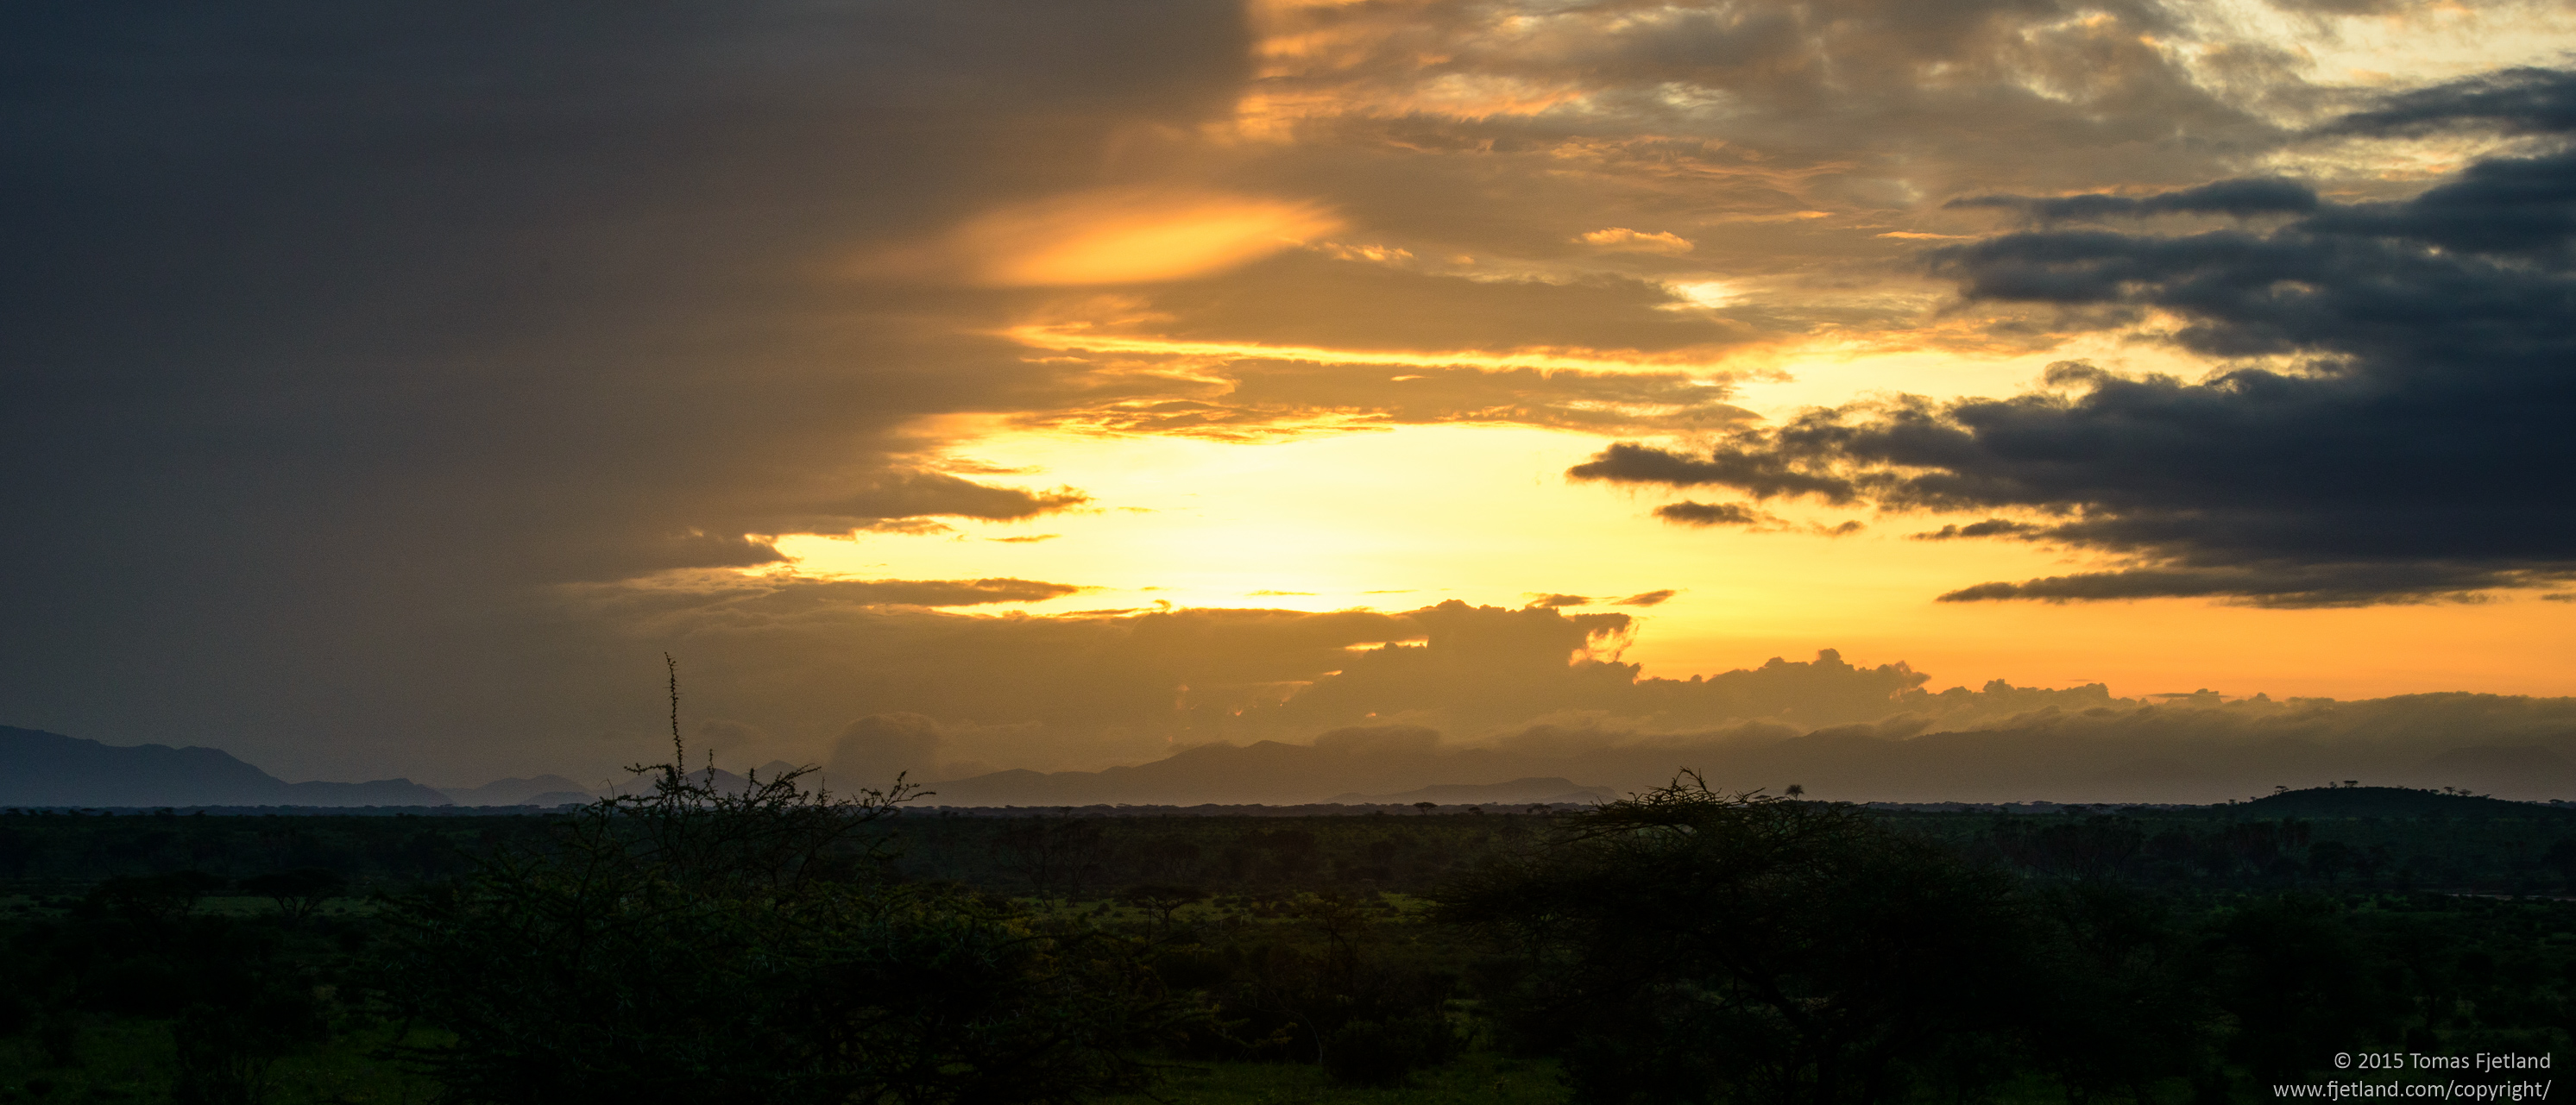 During a cloudy morning we only get a glimpse of the sunrise over Samburu